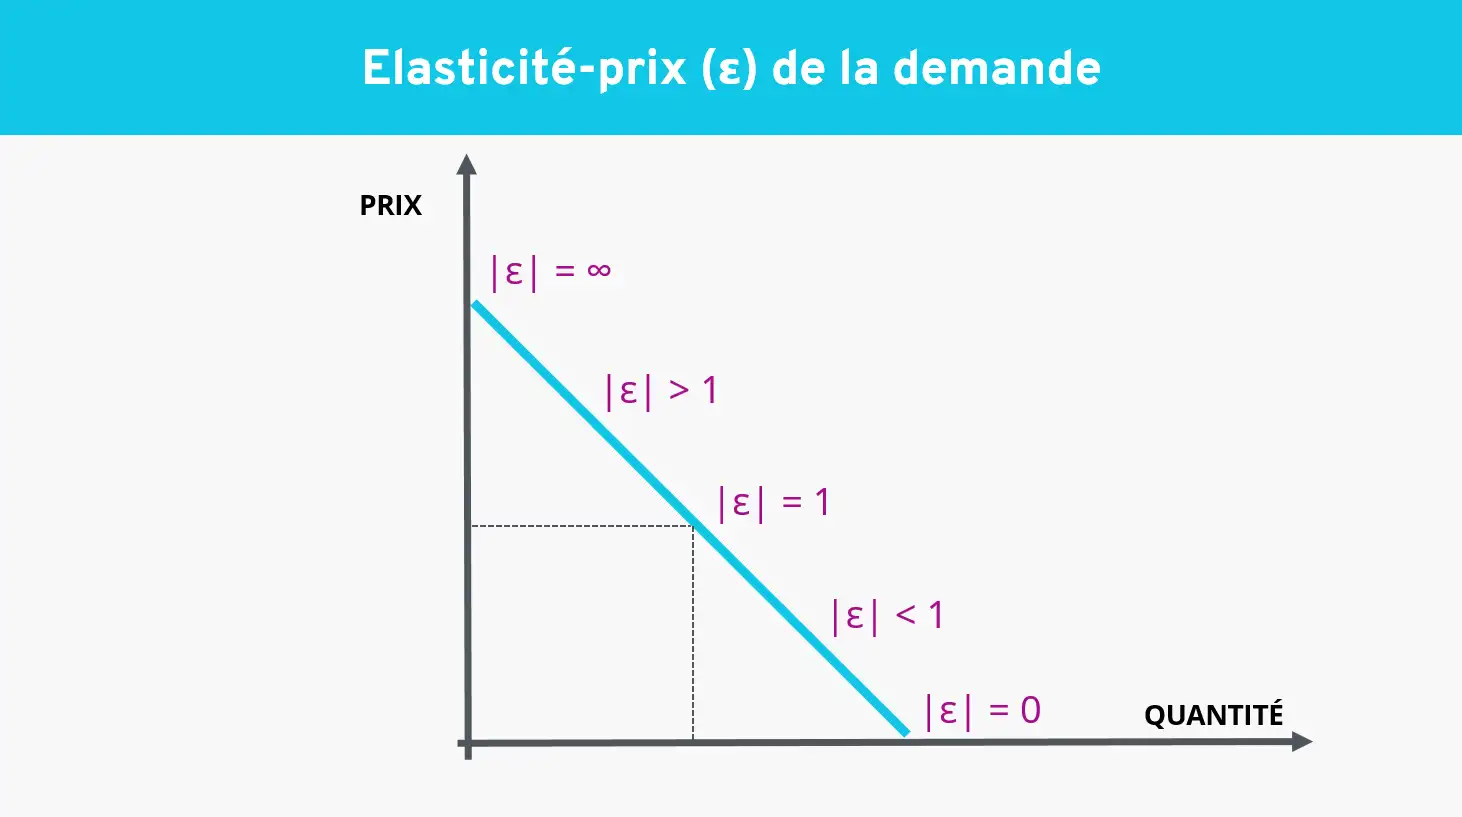 How to calculate price elasticity?